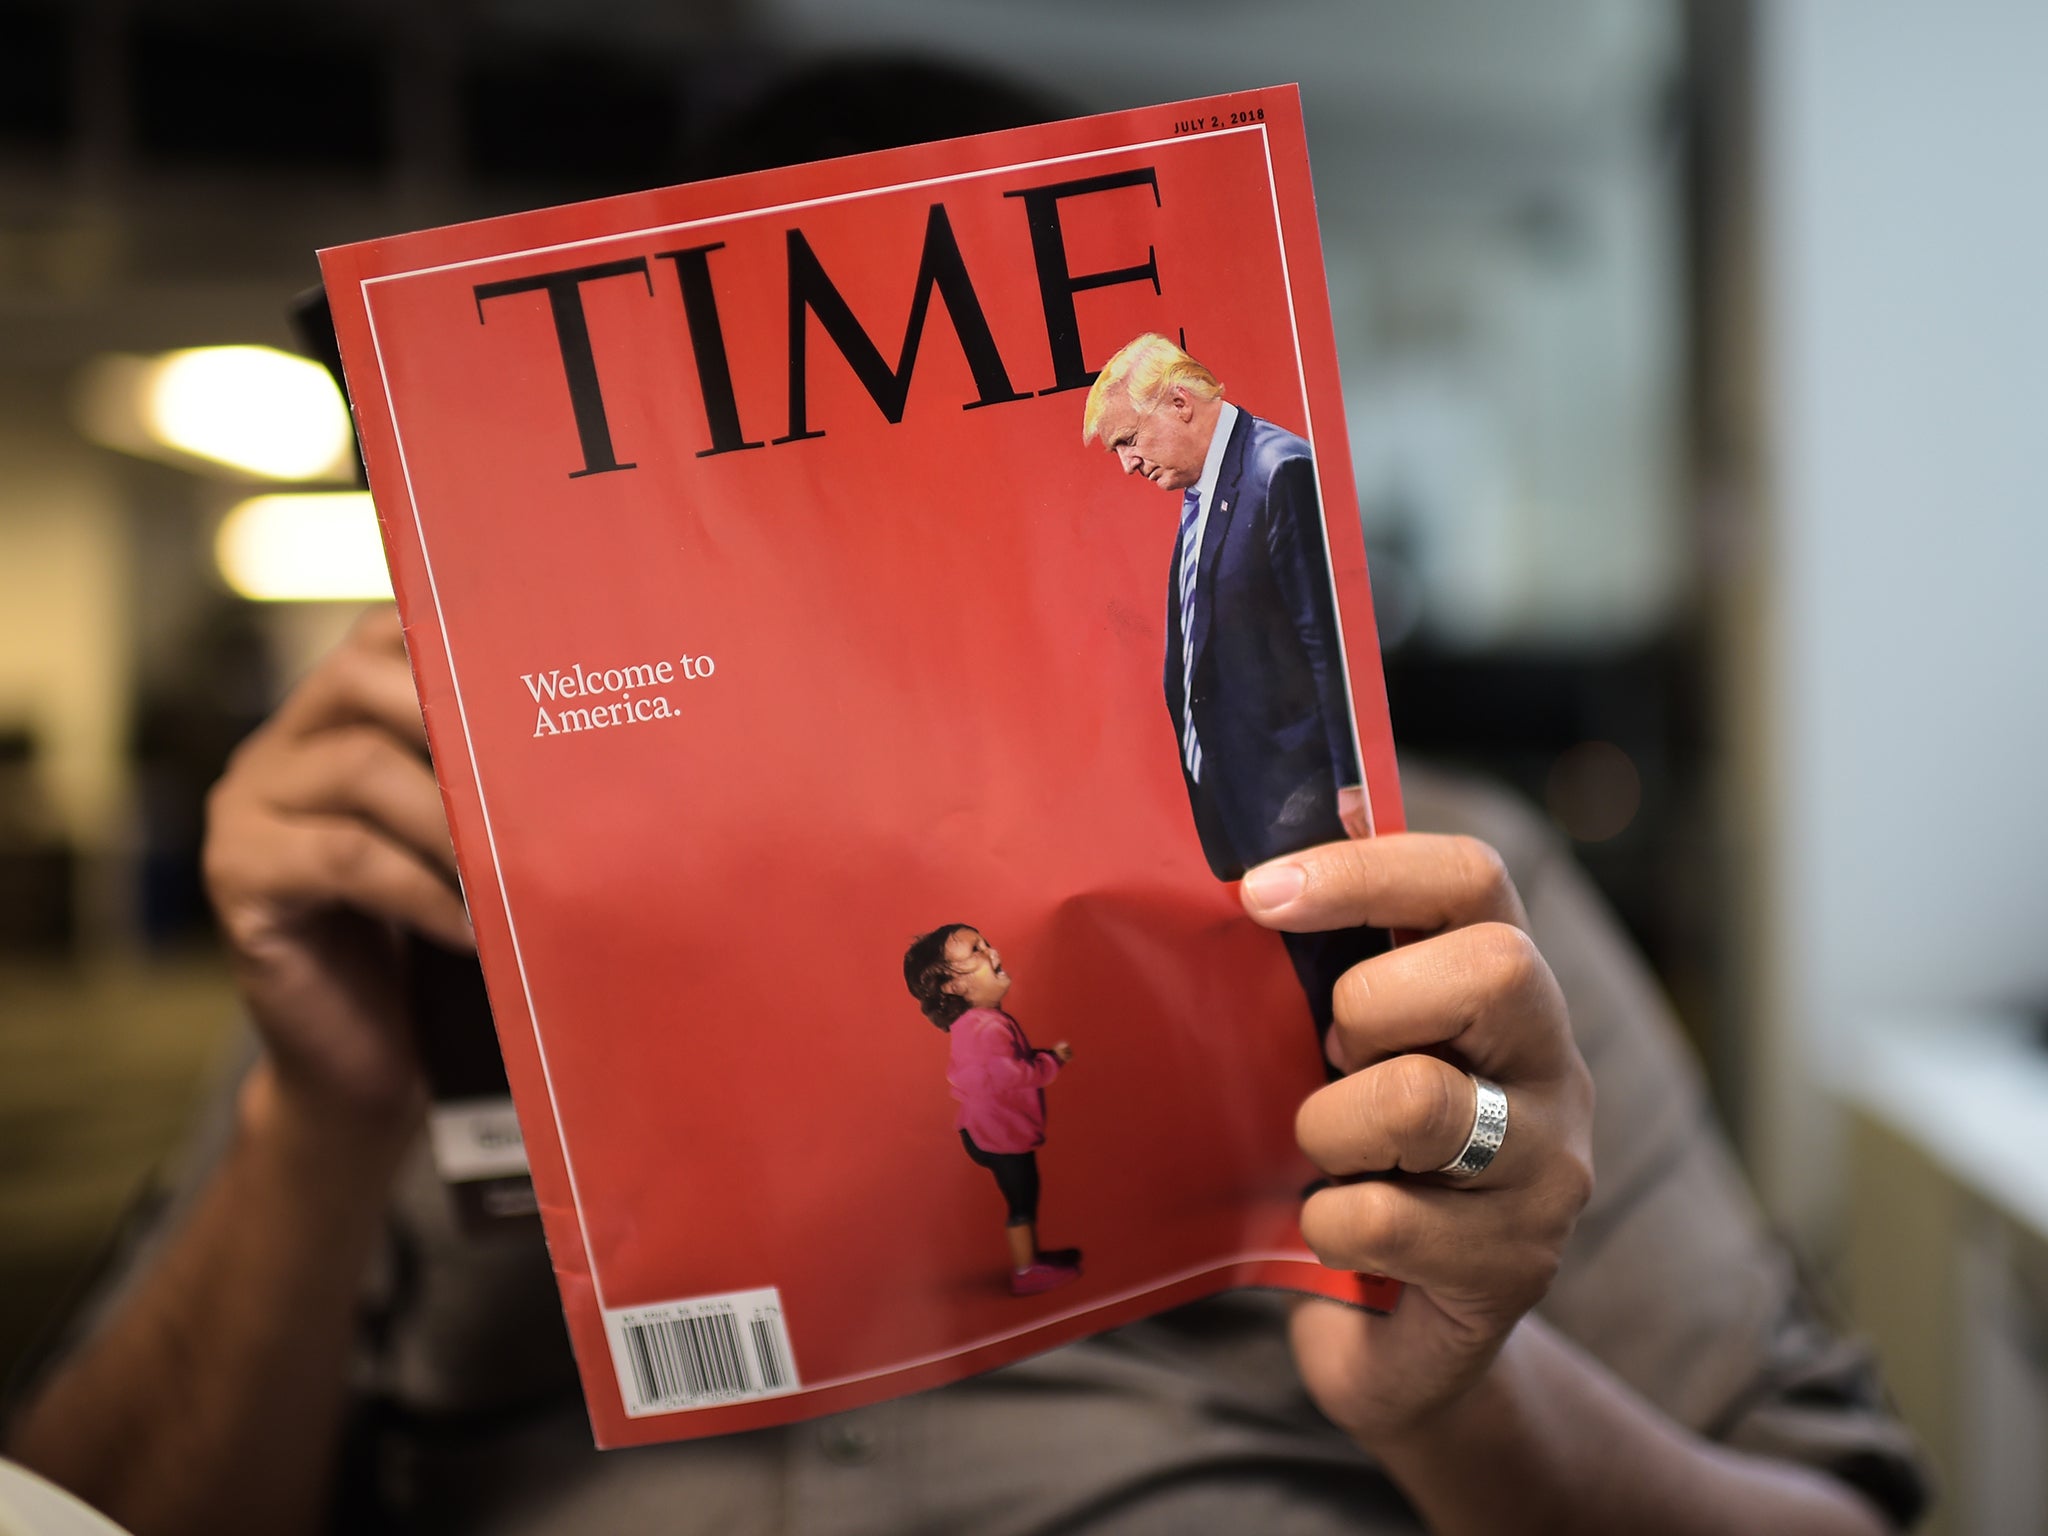 time magazine covers person of the year